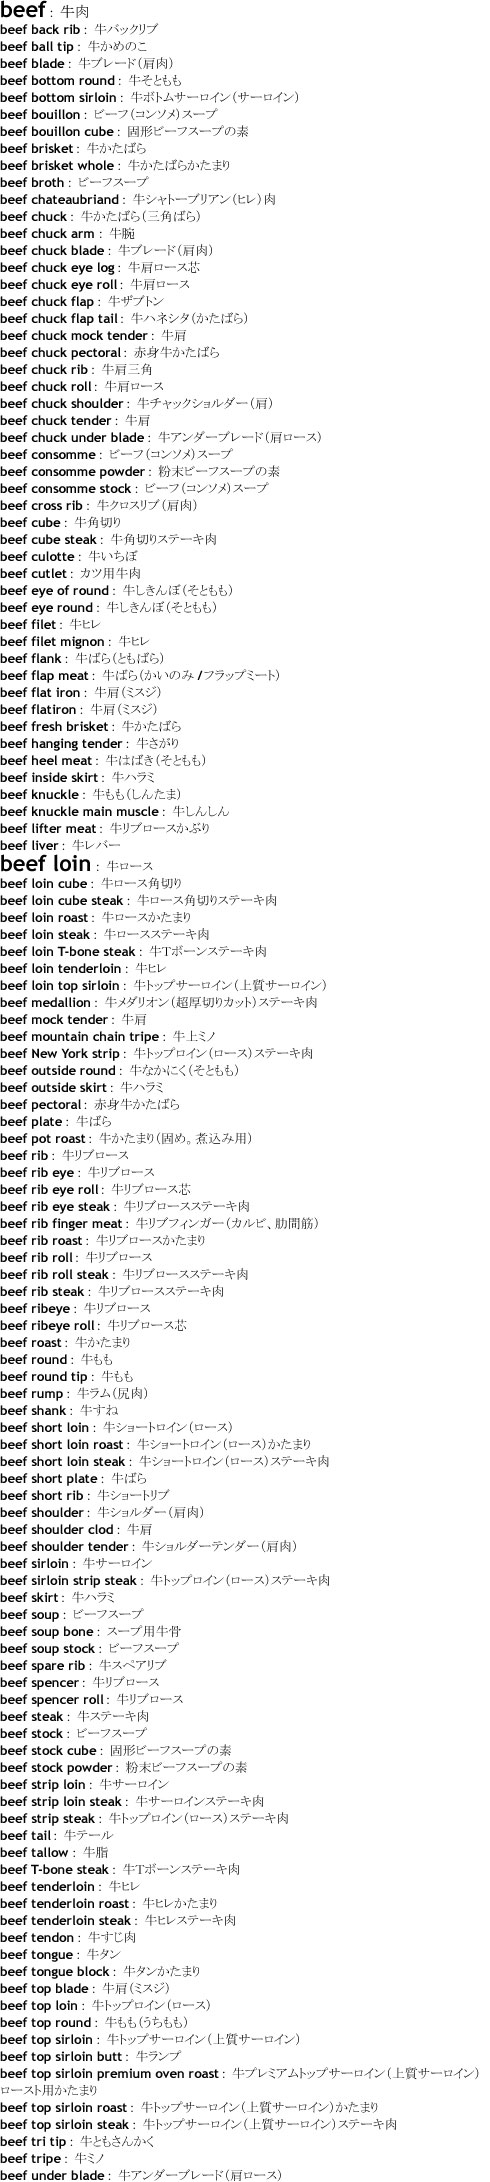 from beef to beef under blade